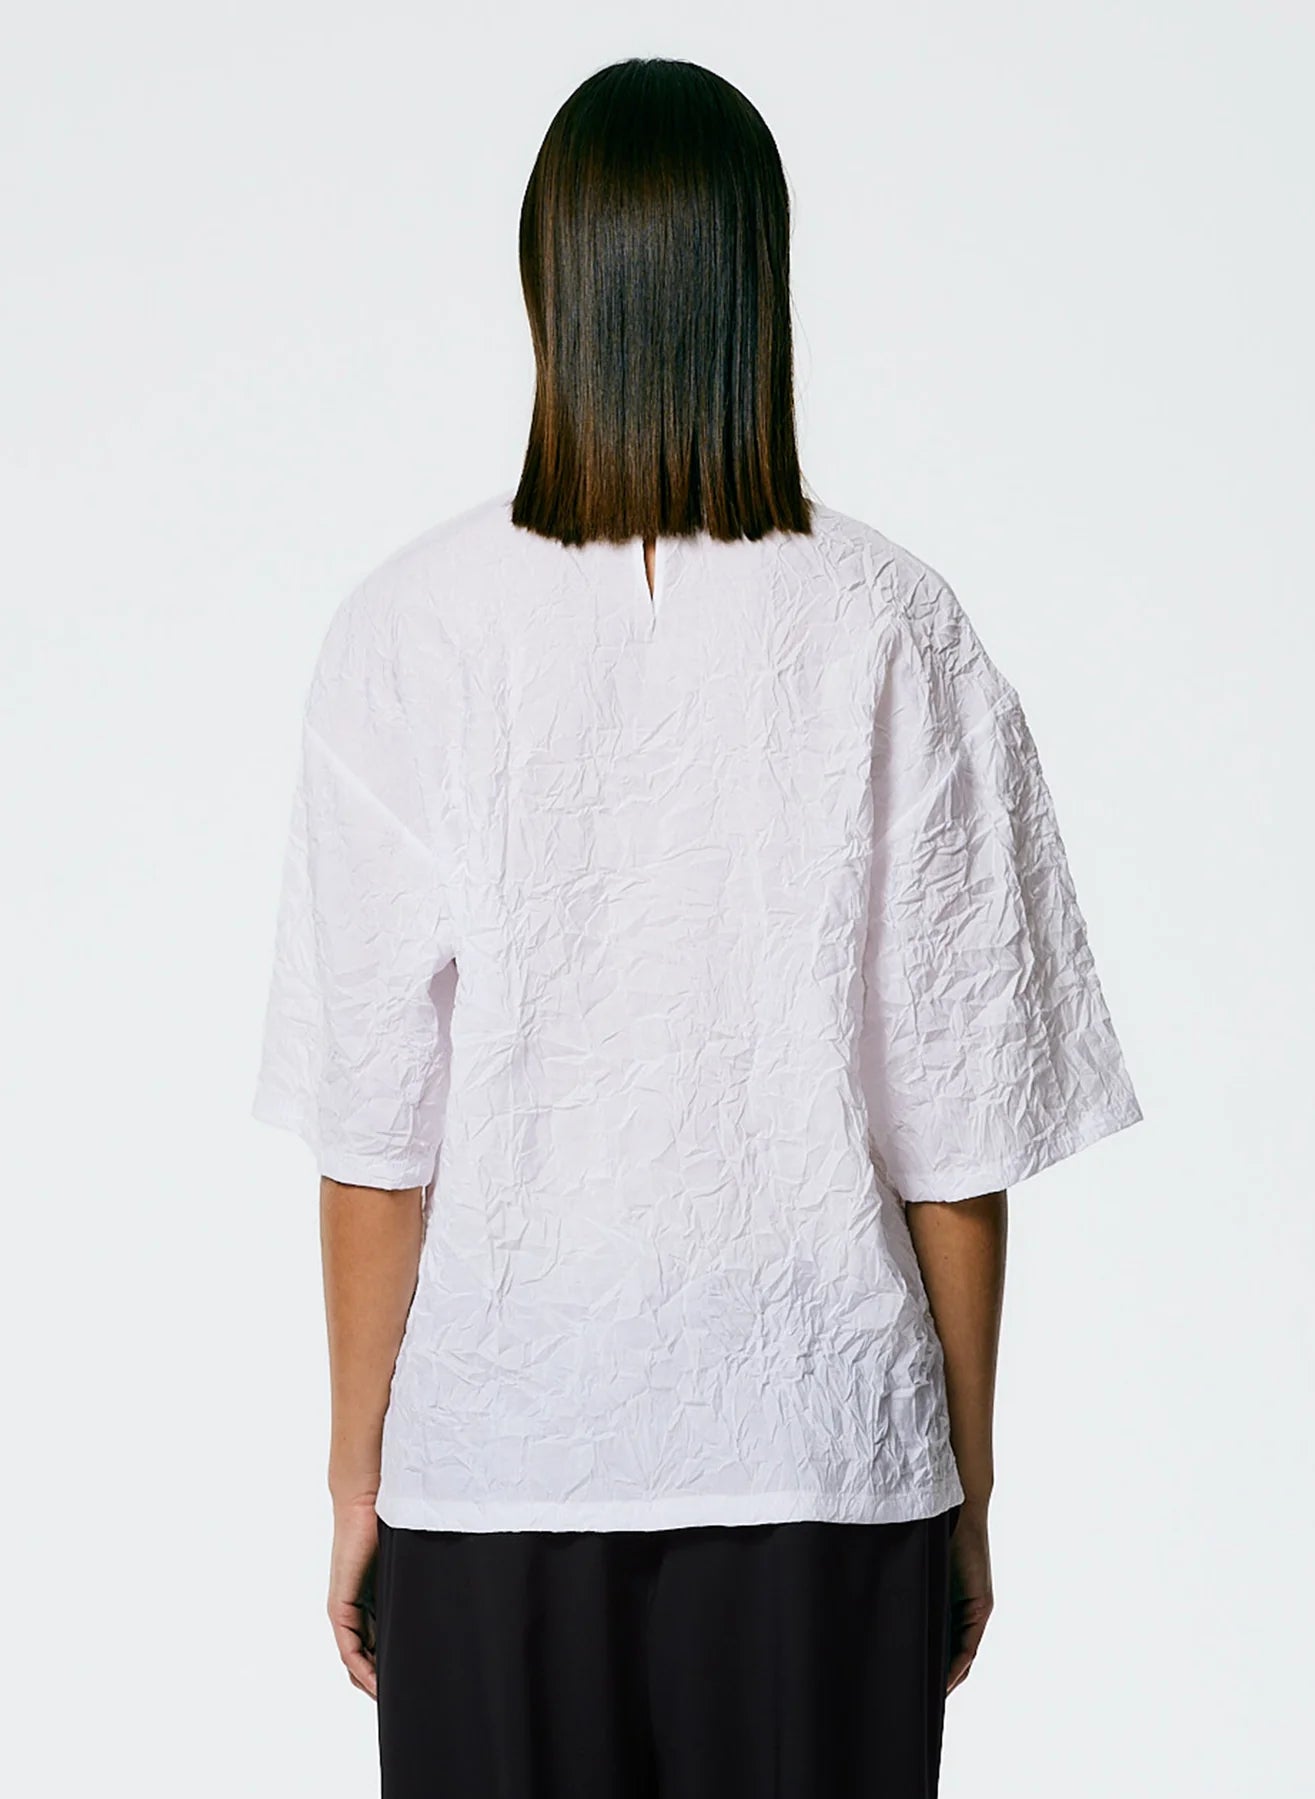 Crinkle Shirting Easy T-Shirt - More Colors Available